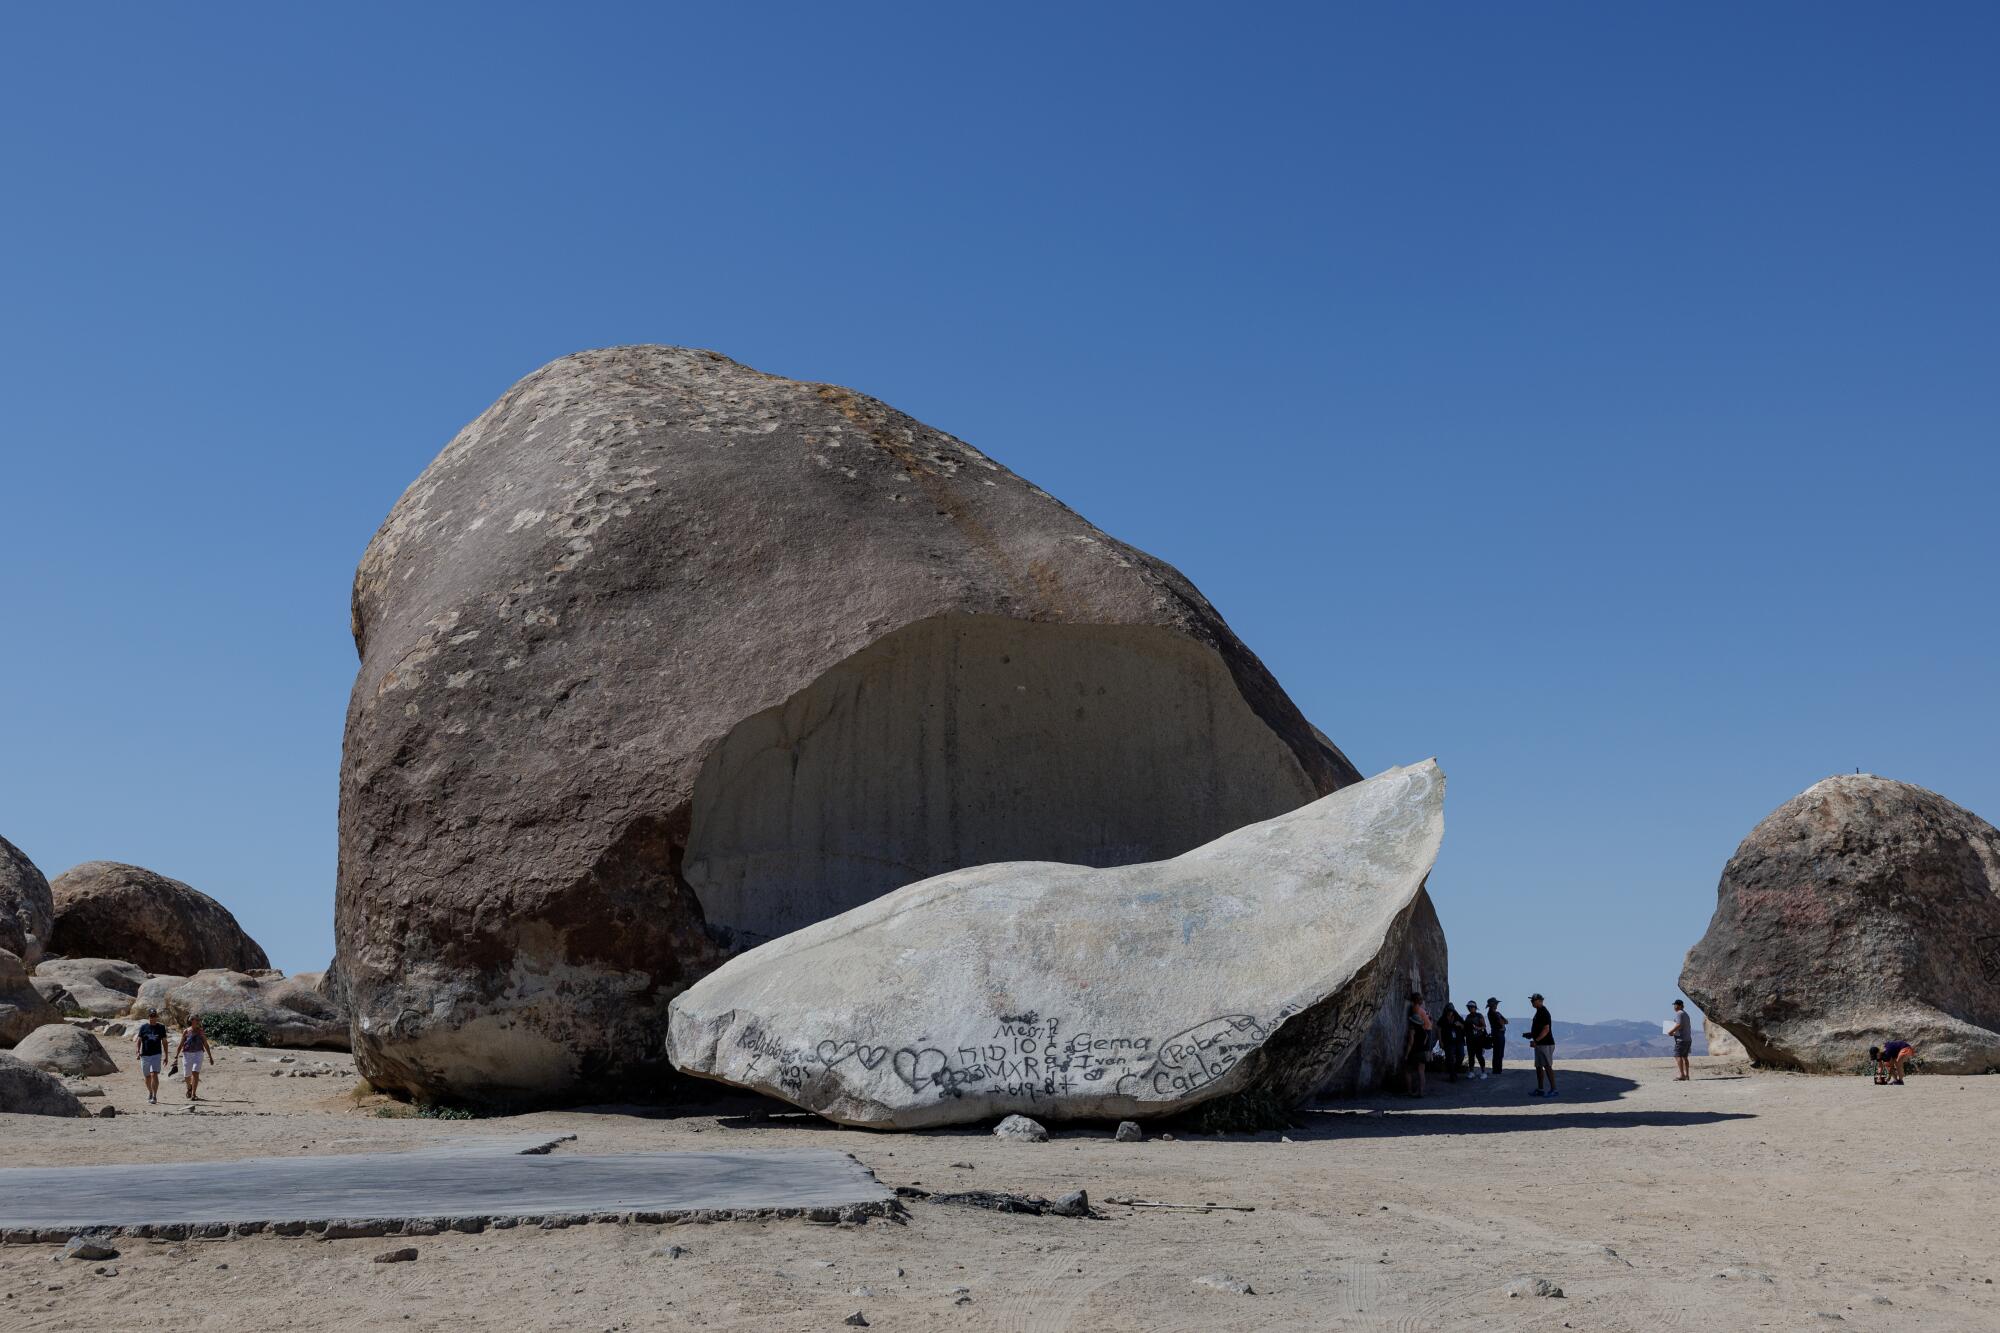 People dot the sand around Giant Rock, a seven story boulder in the Mojave Desert.